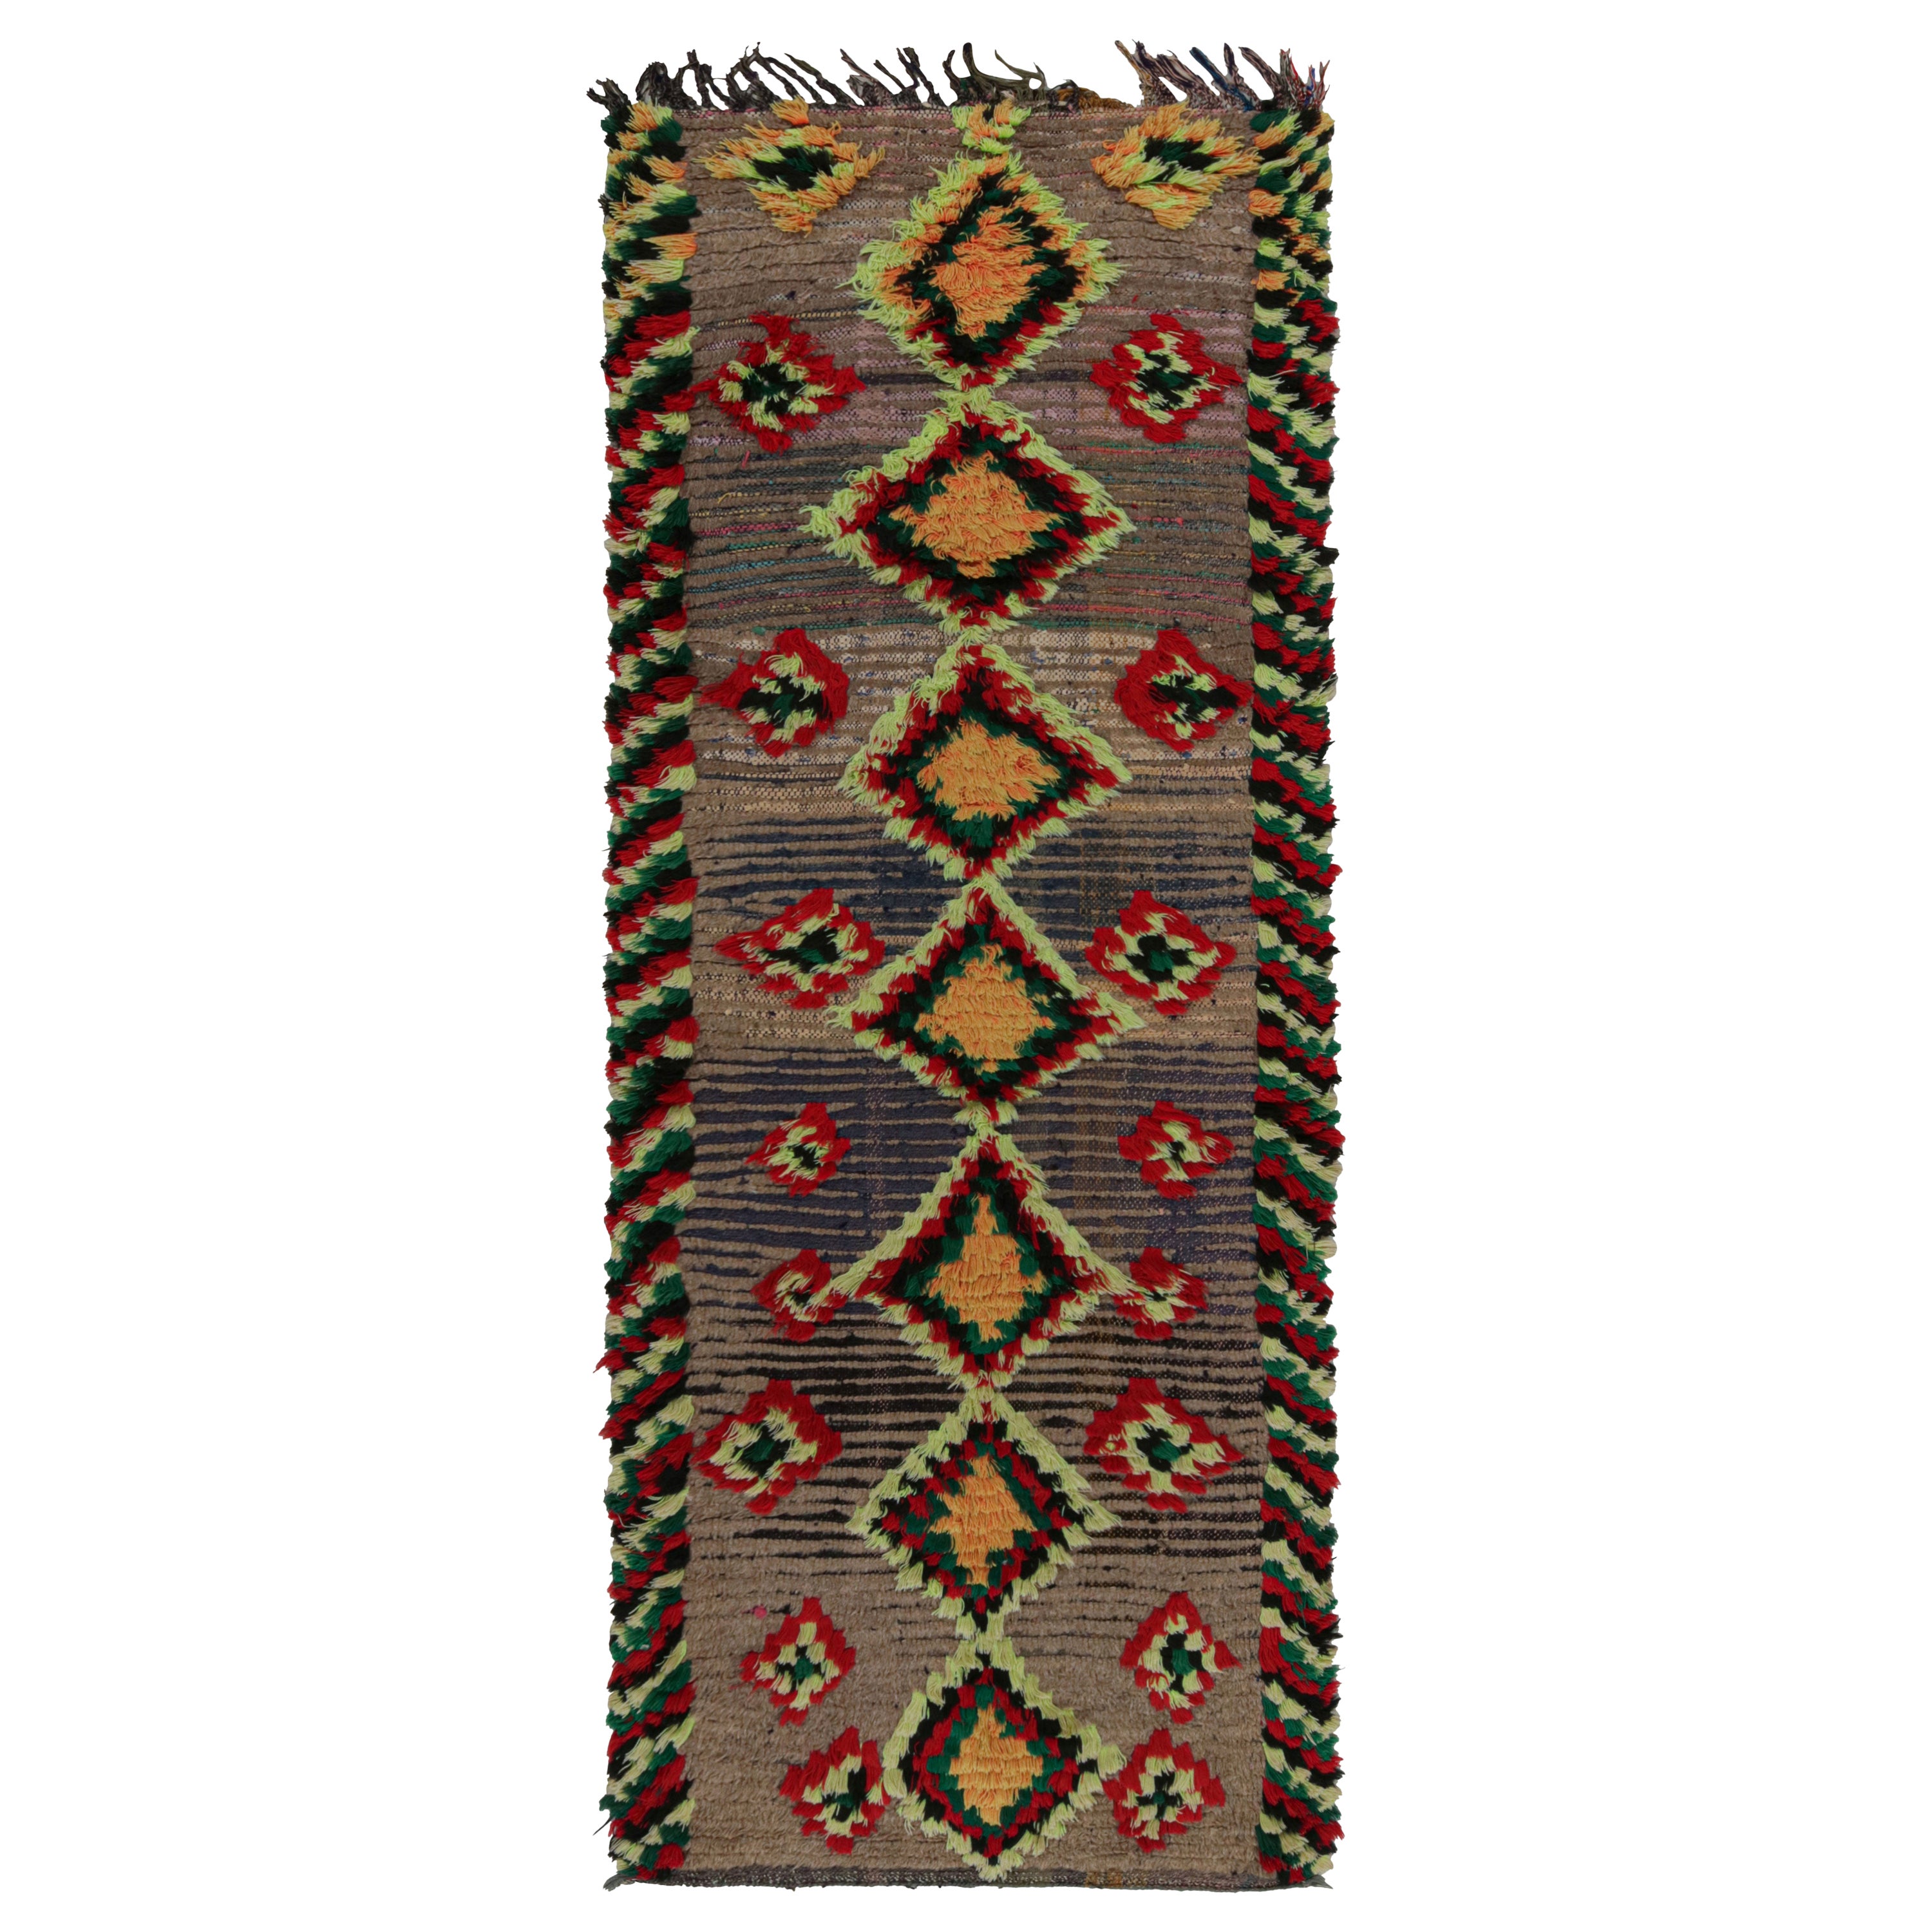 Vintage Moroccan Runner Rug with Colorful Diamond Medallions, from Rug & Kilim  For Sale